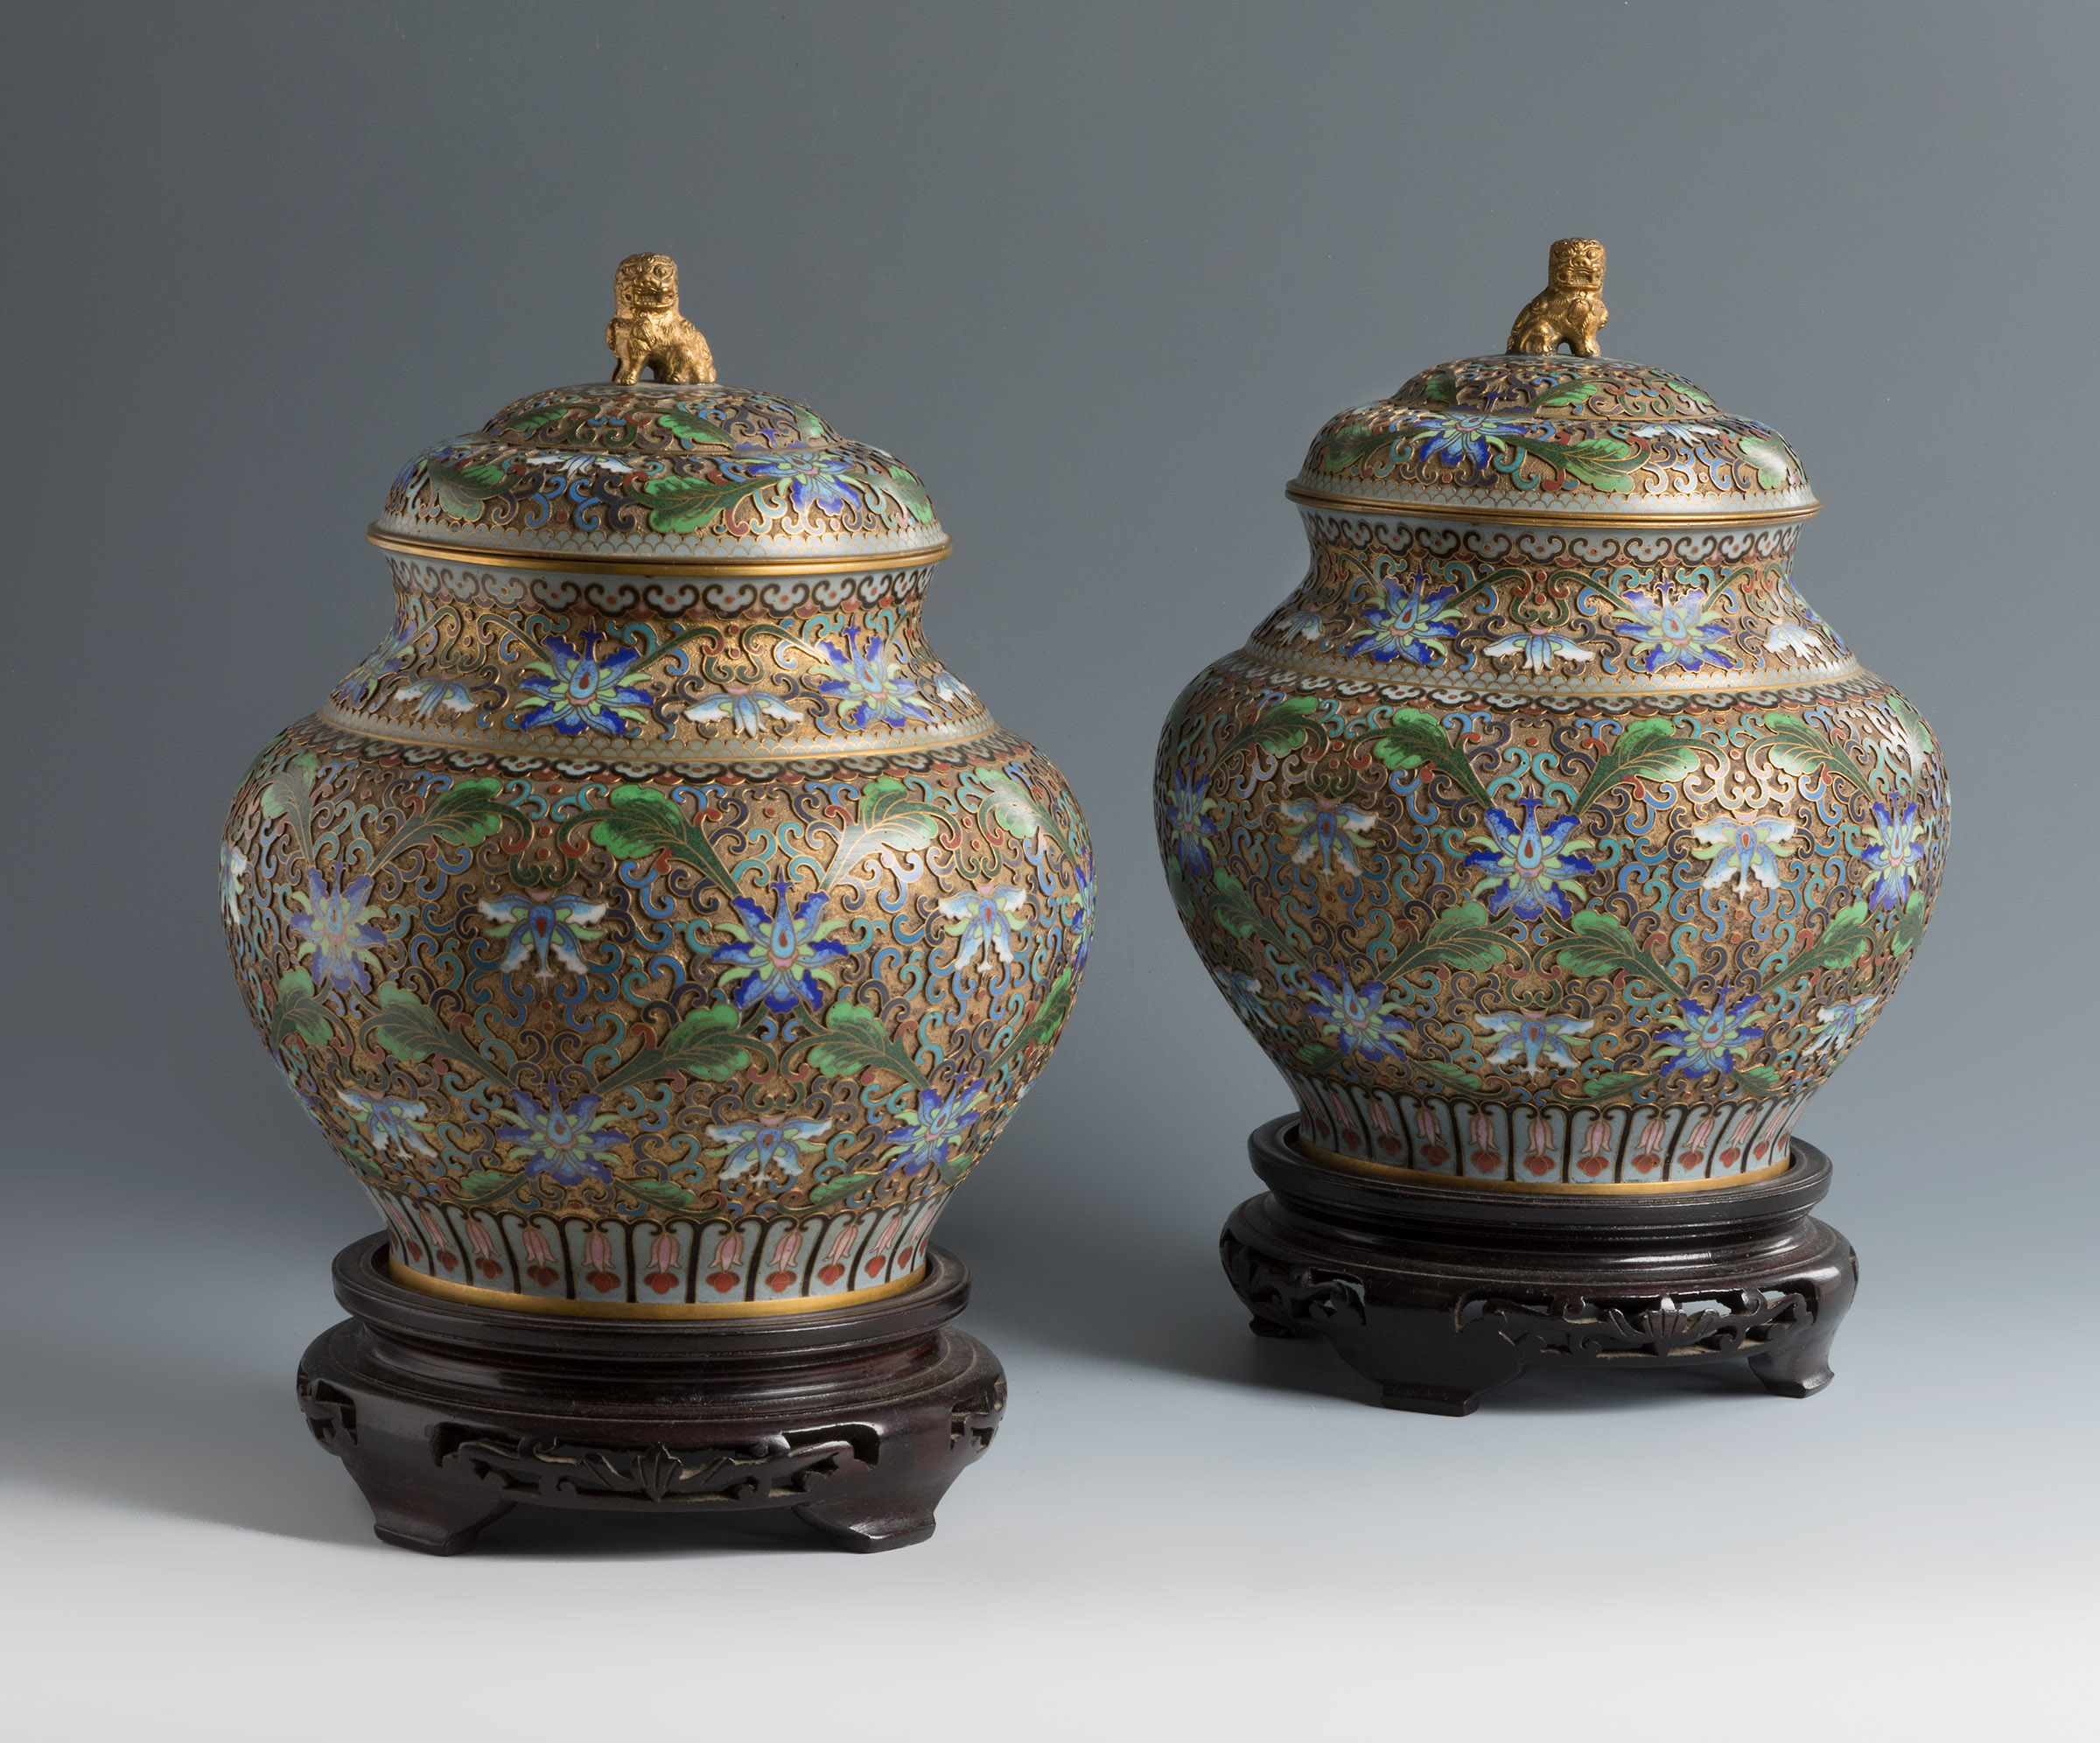 Pair of ginger storage jars. China, 1920-1940.Bronze and cloisonné enamel. Carved wooden bases.